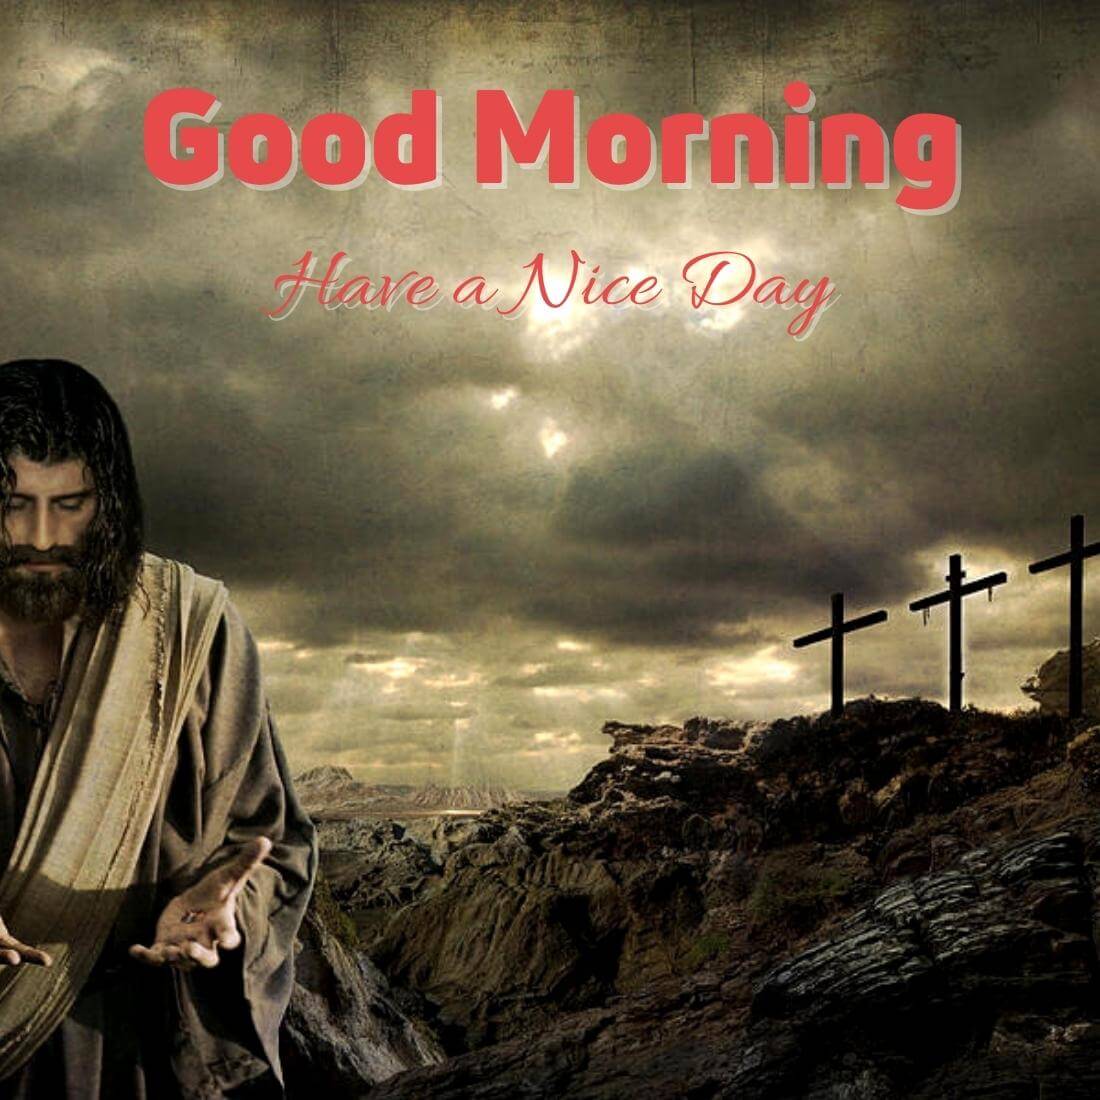 Lord Jesus good morning Images Download